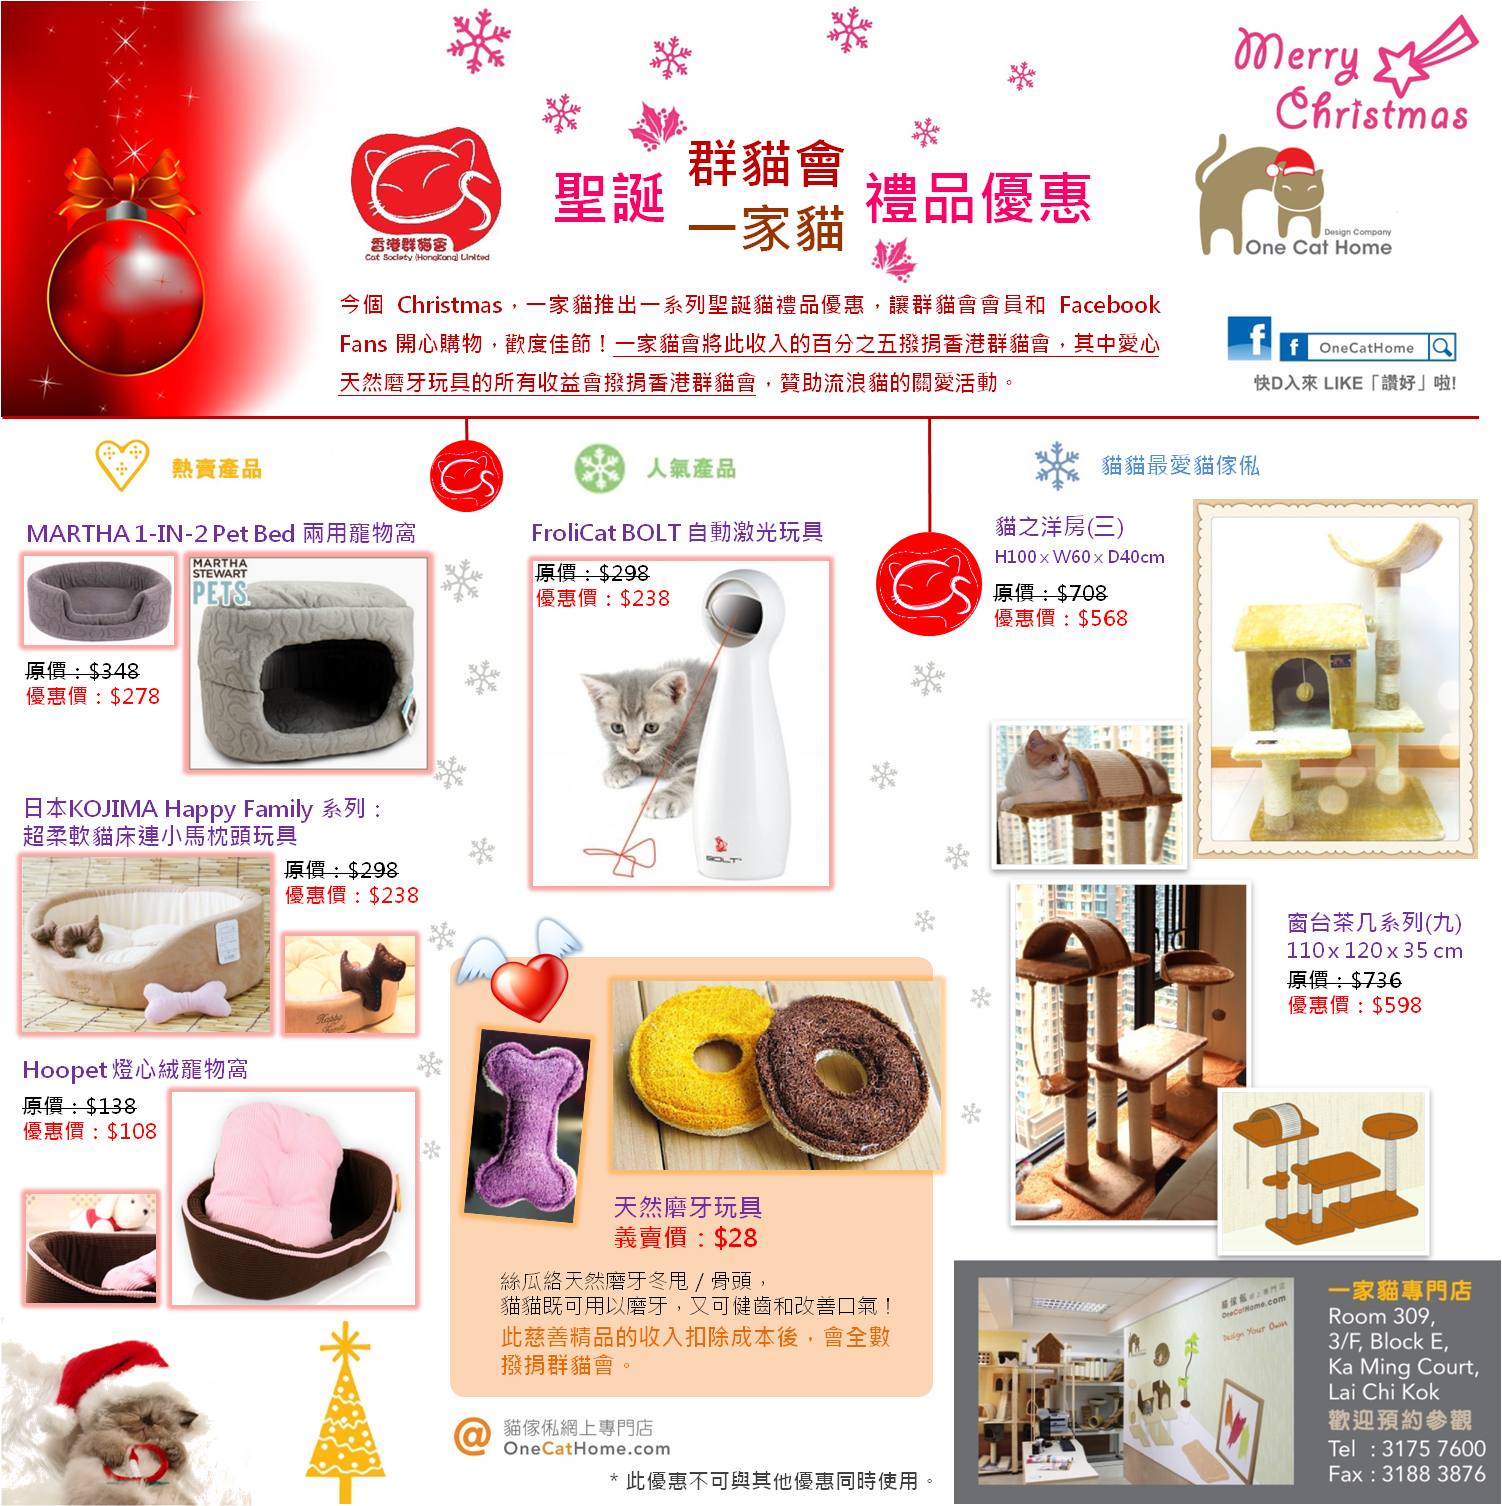 Christmas Promotion 2011 - Cat Society